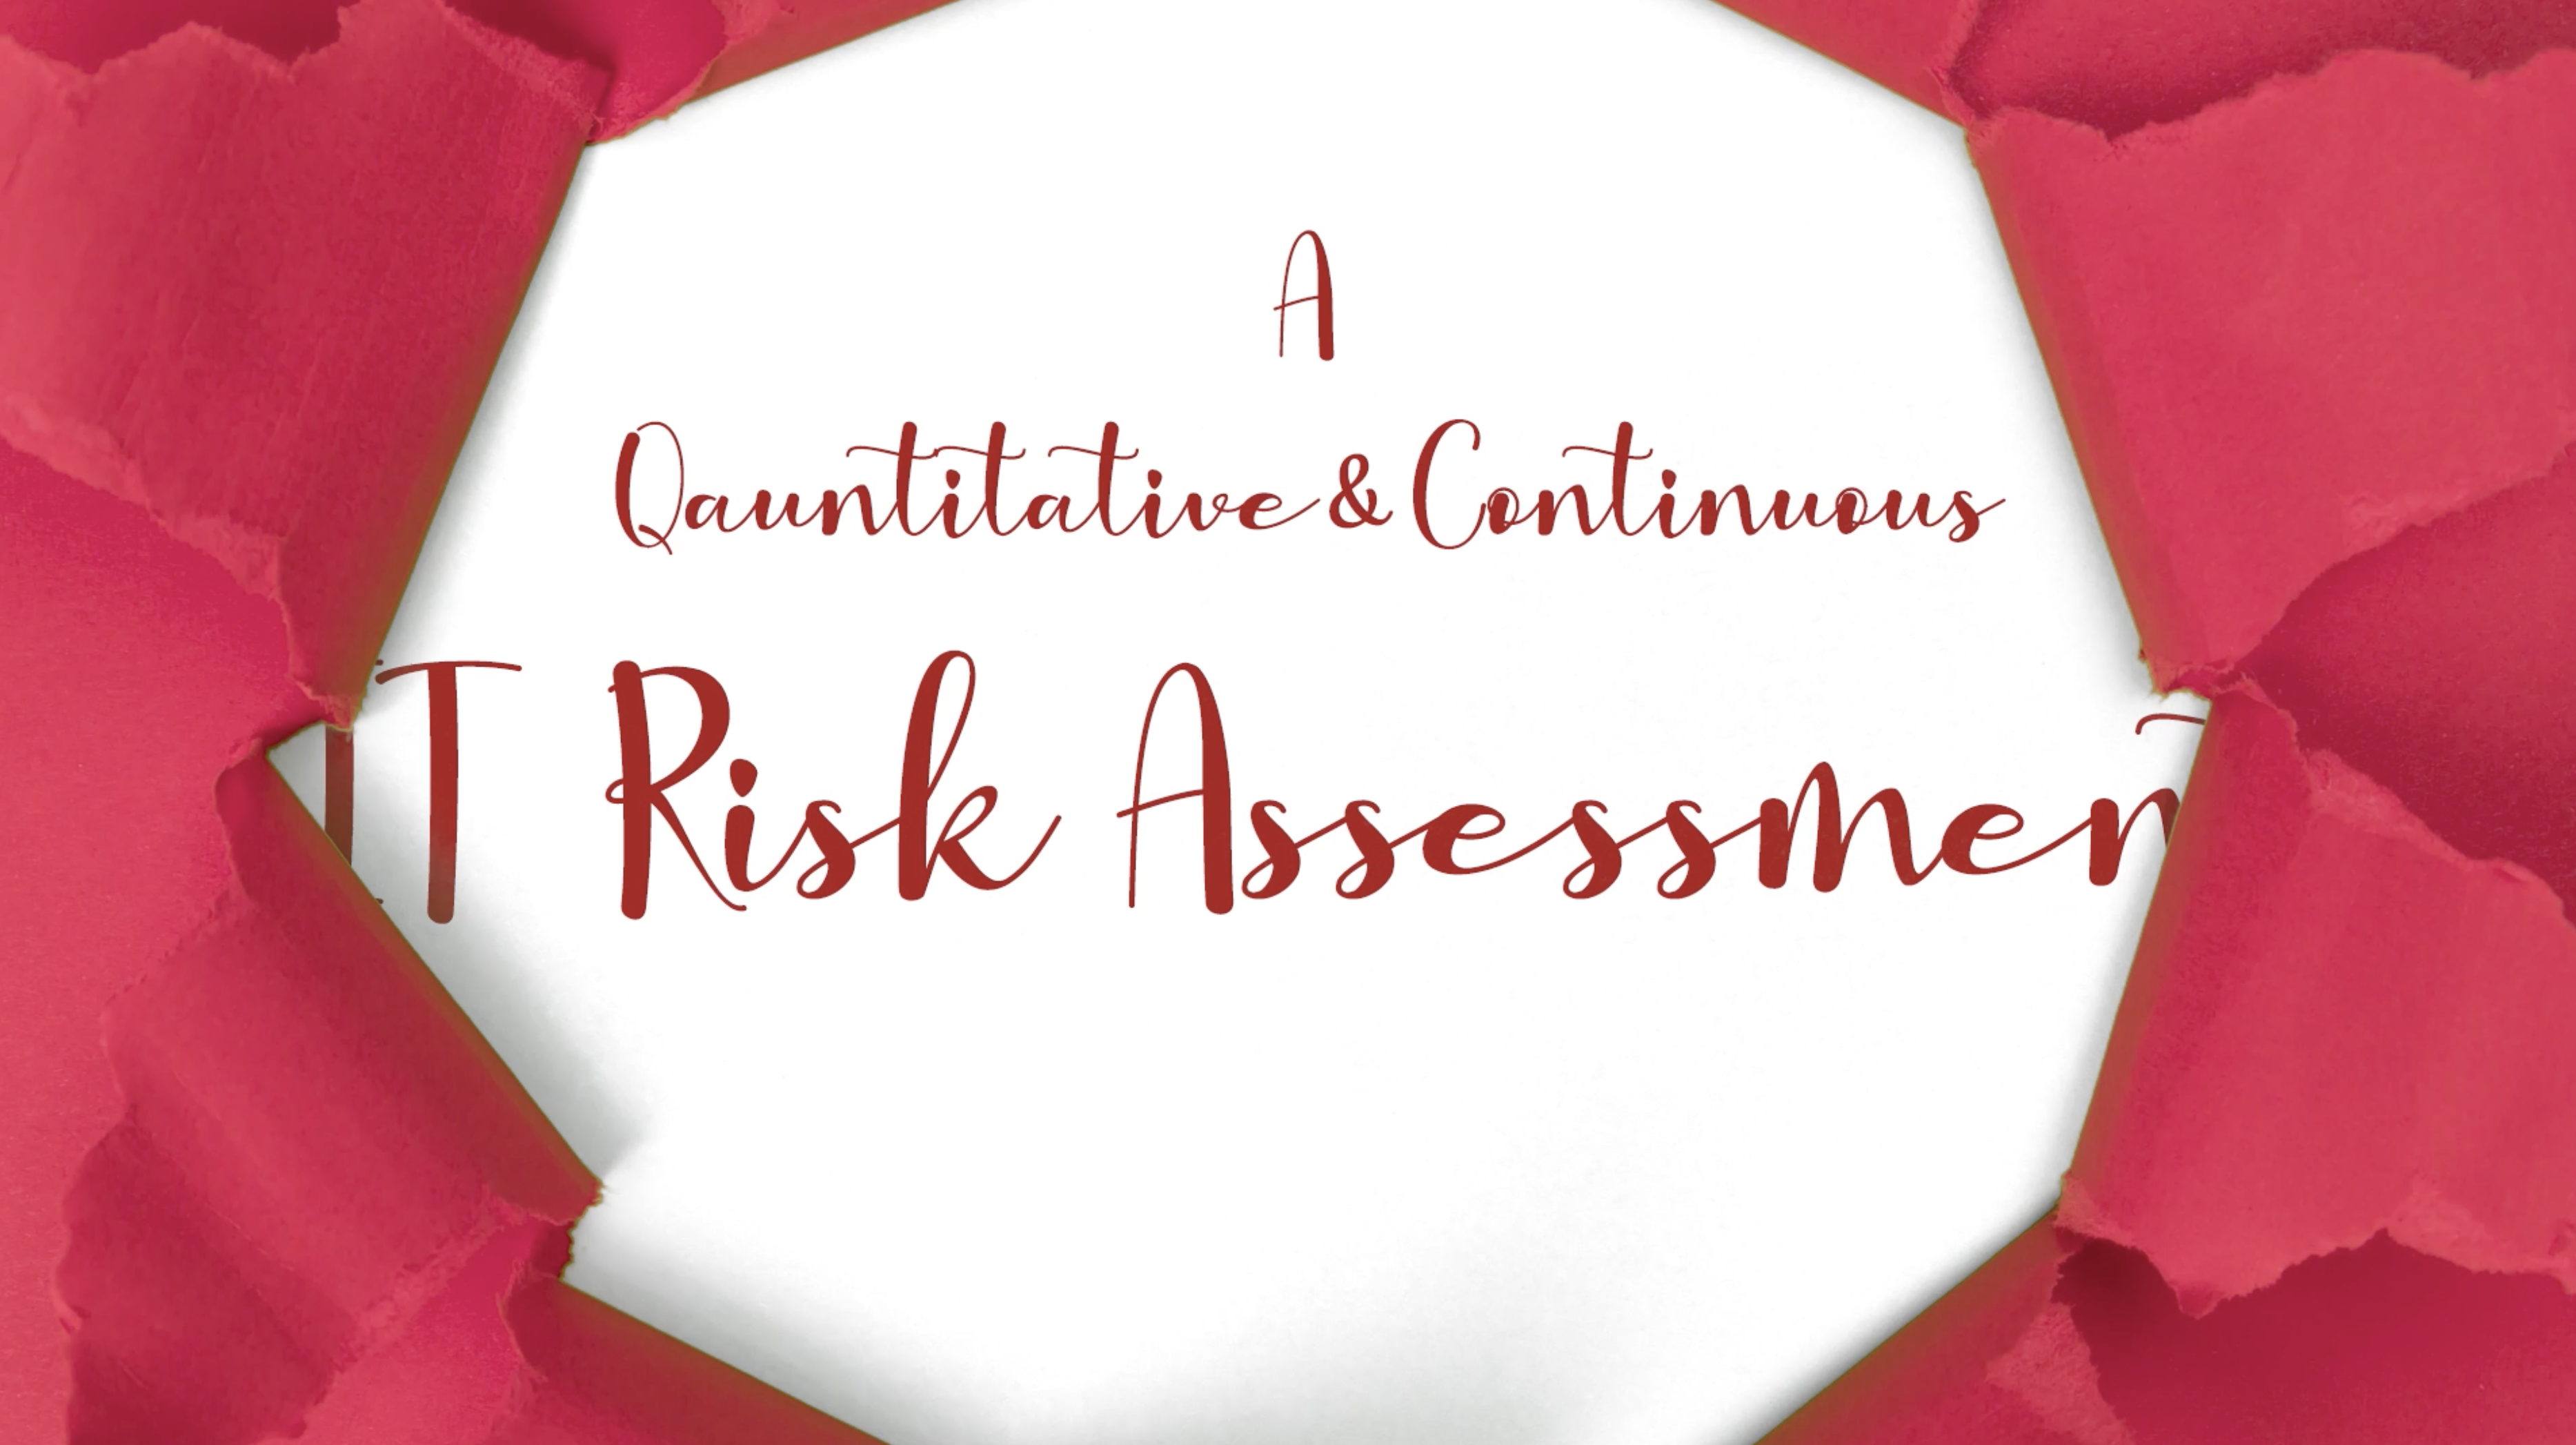 IT Risk Assessment: The Gift That Keeps On Giving